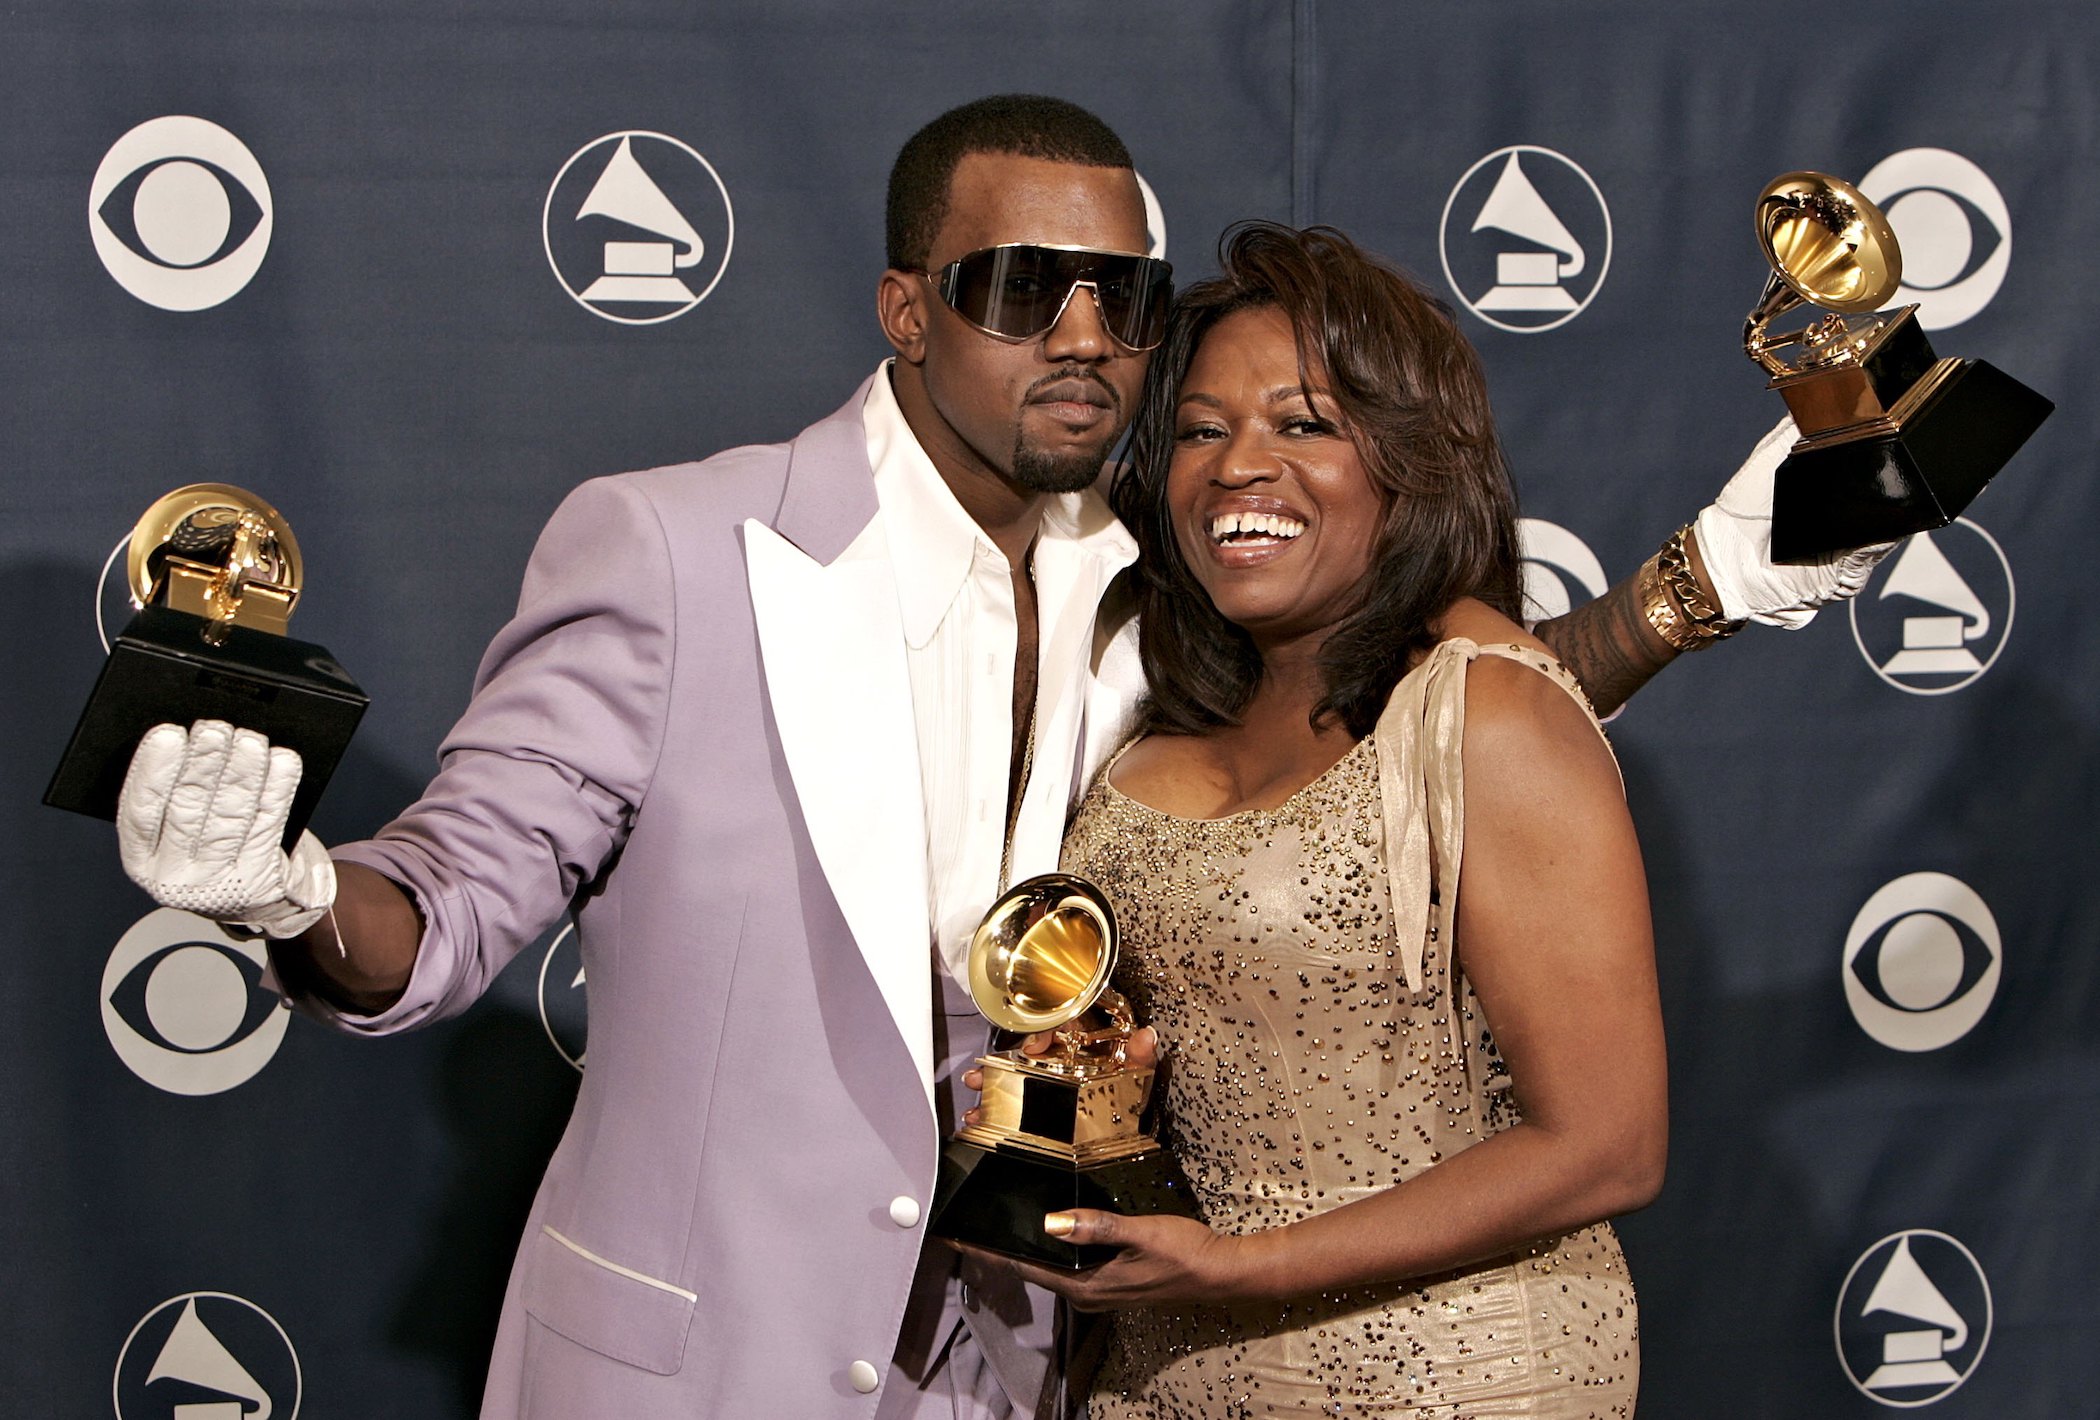 Kanye West and his mom, the late Donda C. West standing together and smiling while holding one of Kanye's awards